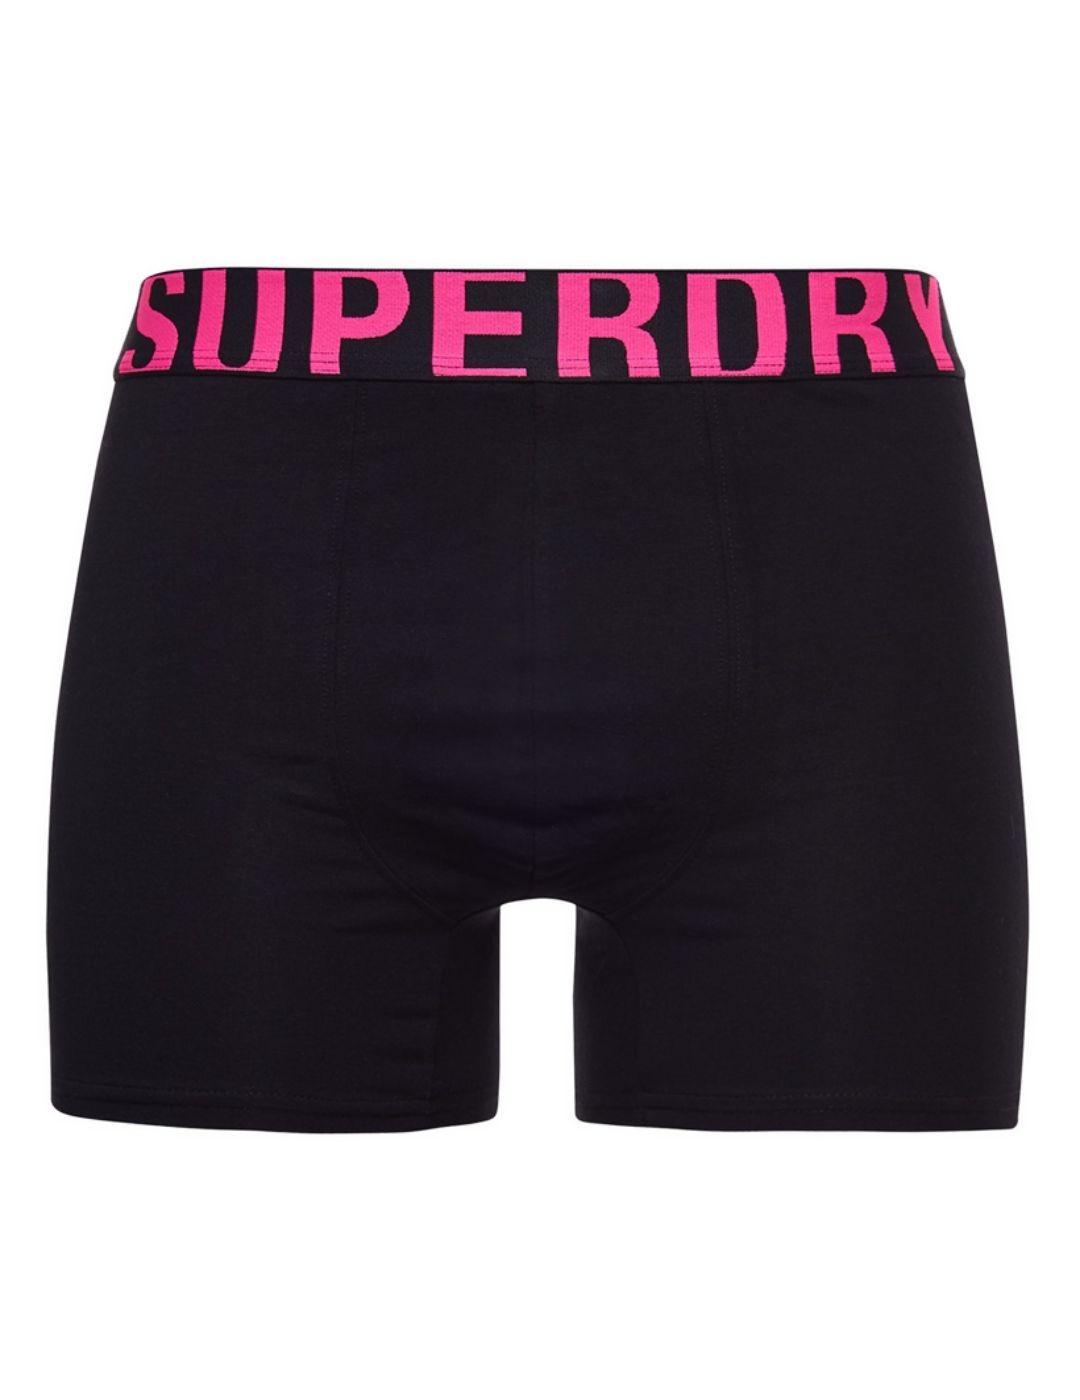 Intimo Superdry pack2 boxer negro para hombre -a